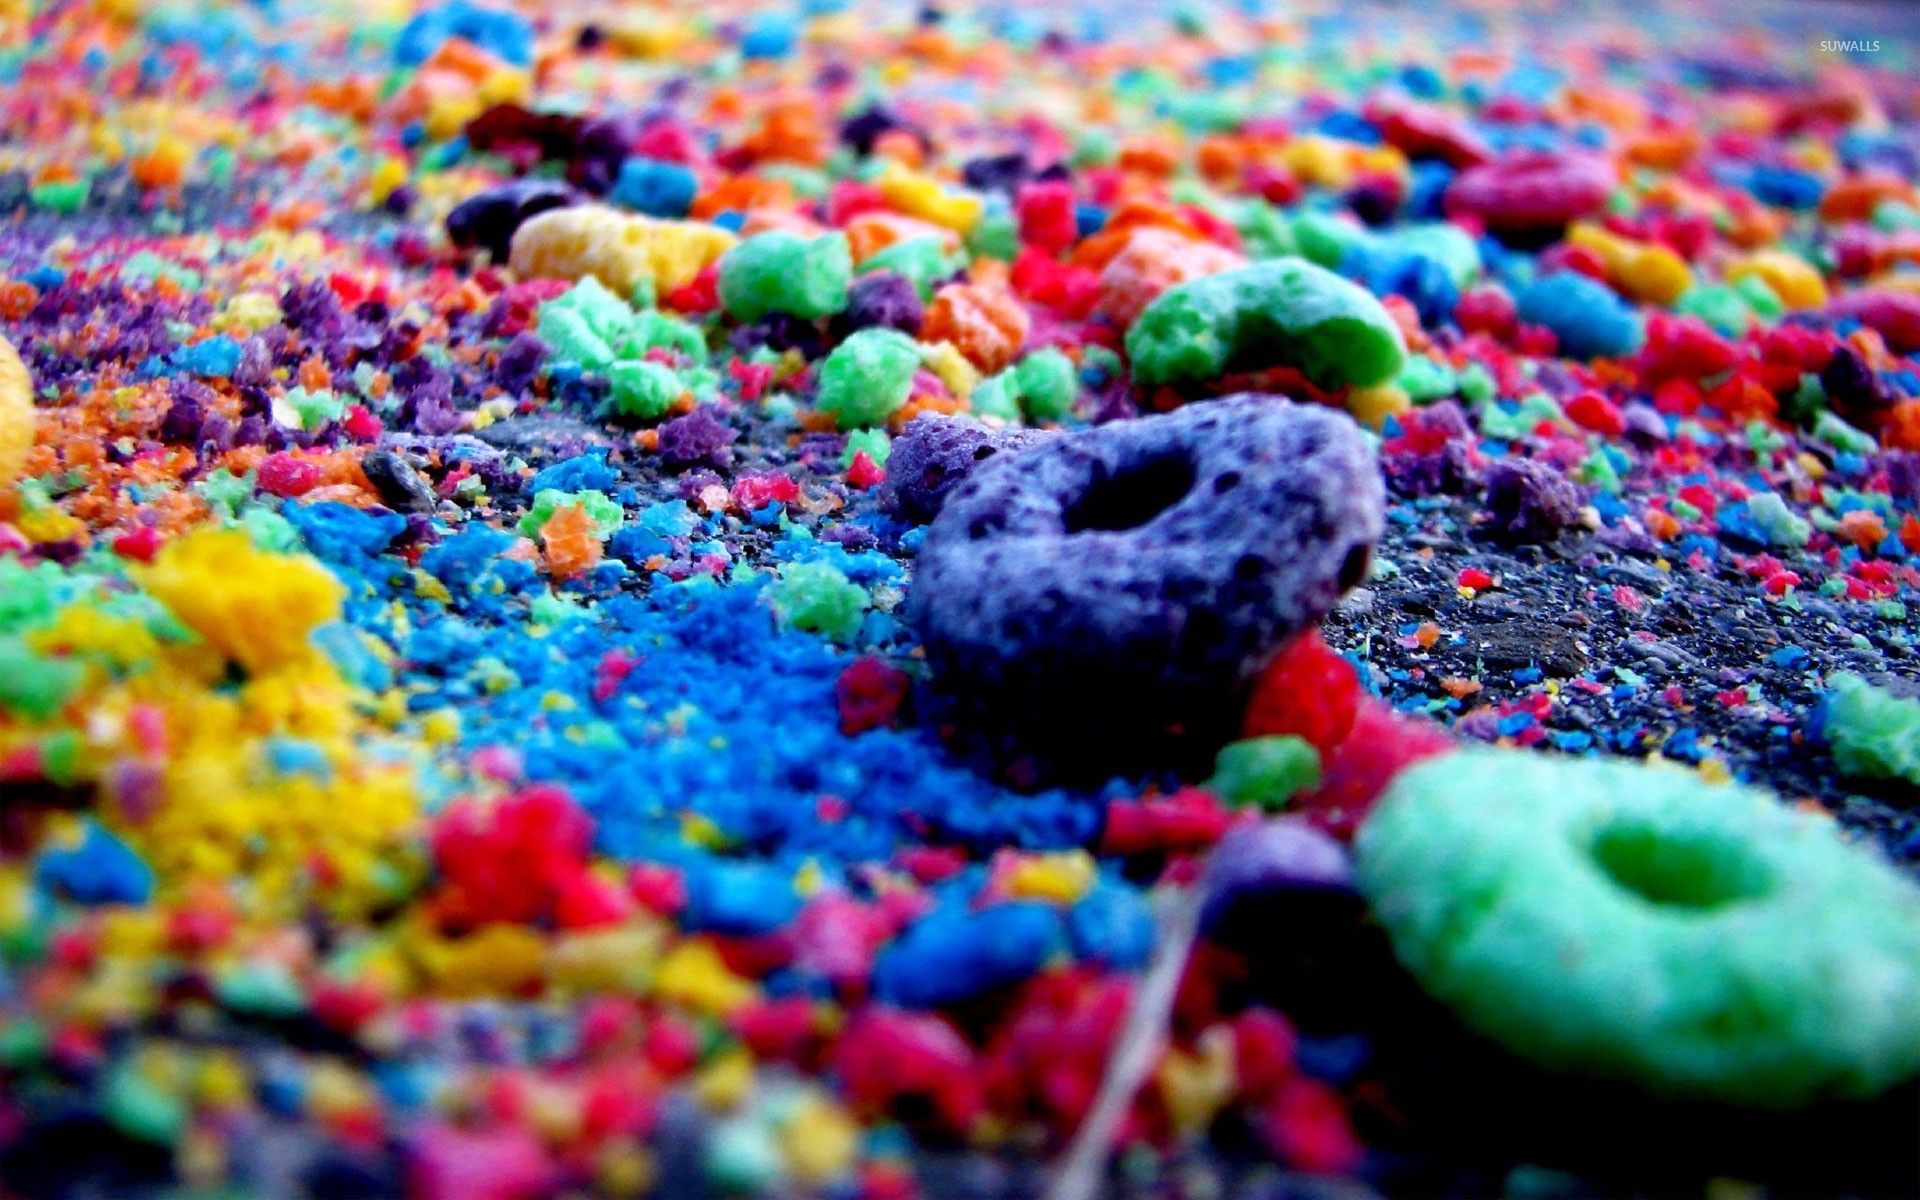 Colorful cereal wallpaper - Photography wallpapers - #20735